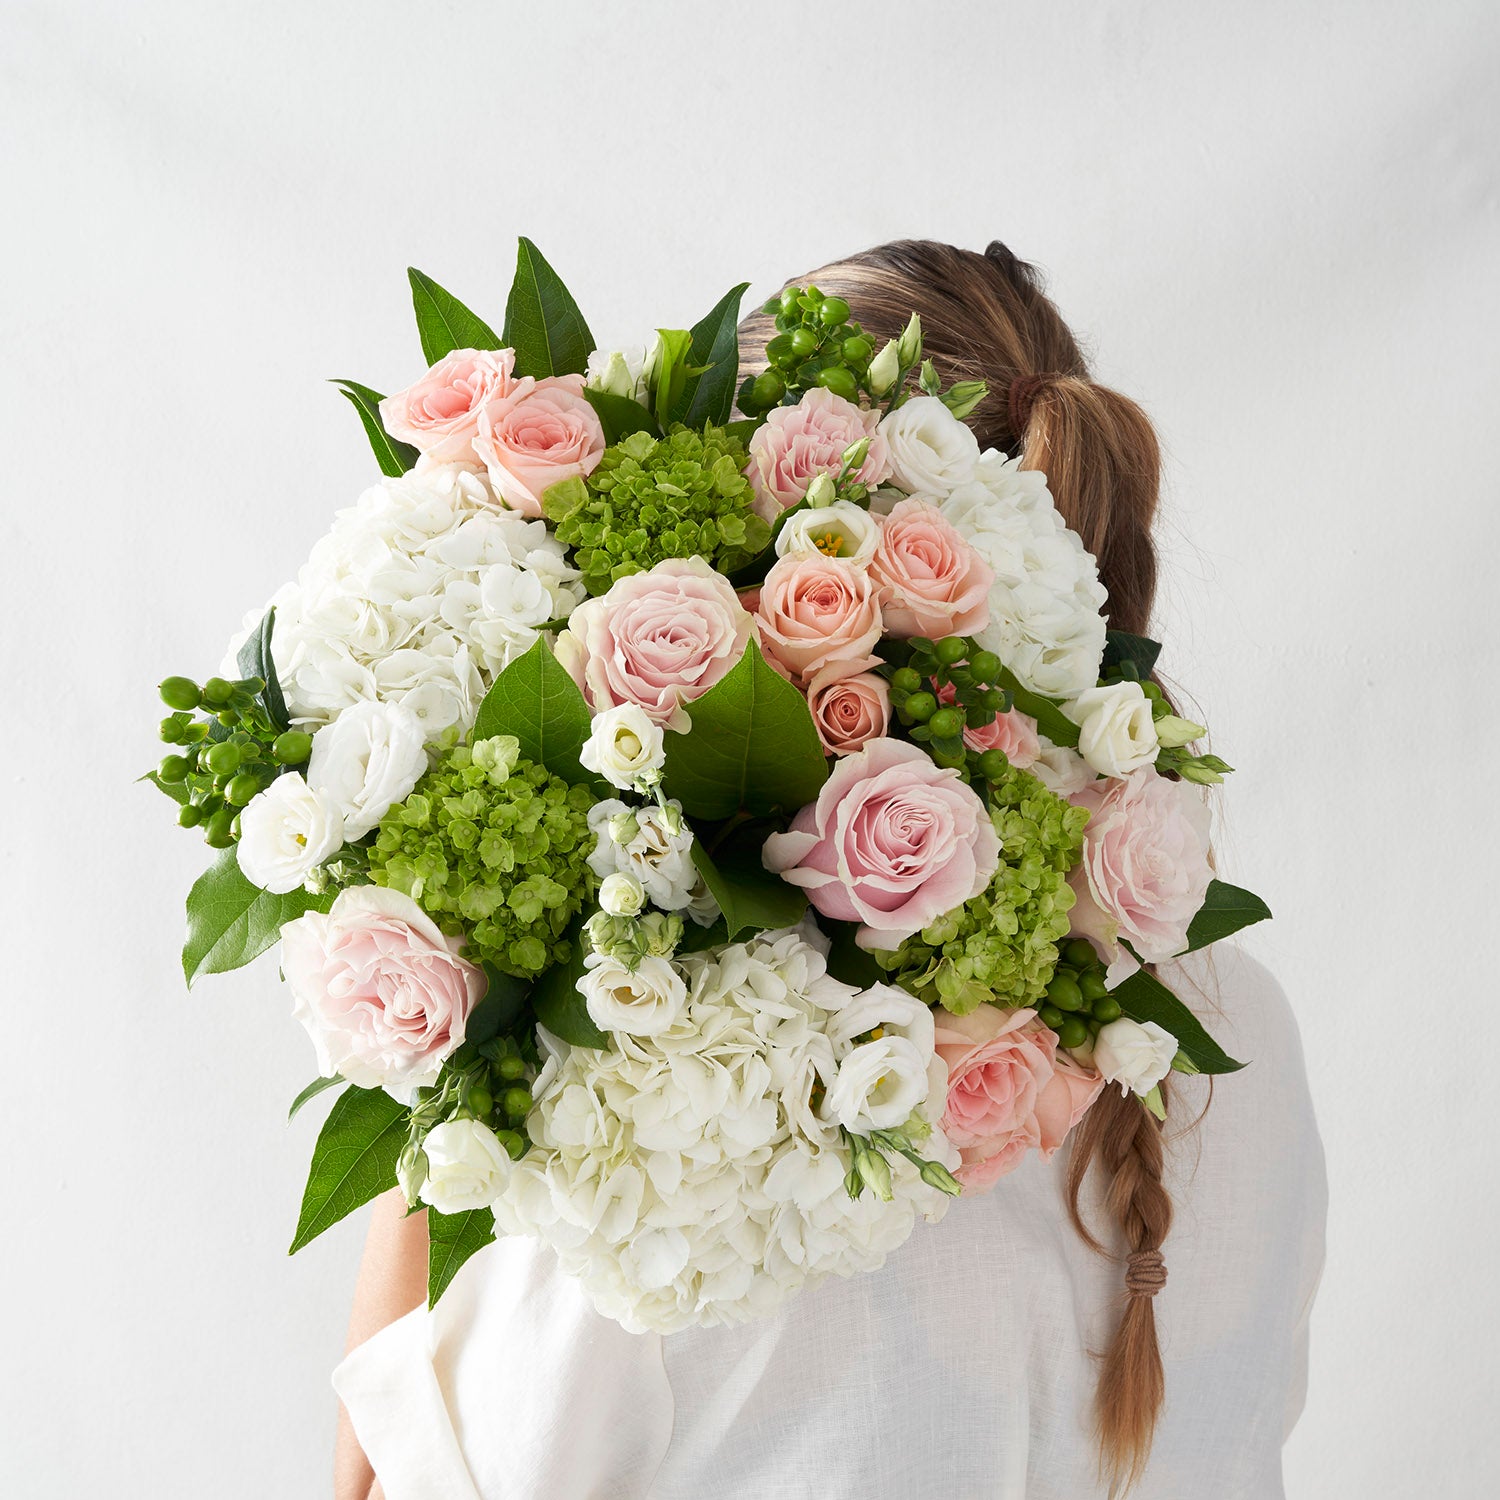 A view fromthe back of a woman in white shirt with long braid holding large round pink white and green bouqet of roses and hydrangea.